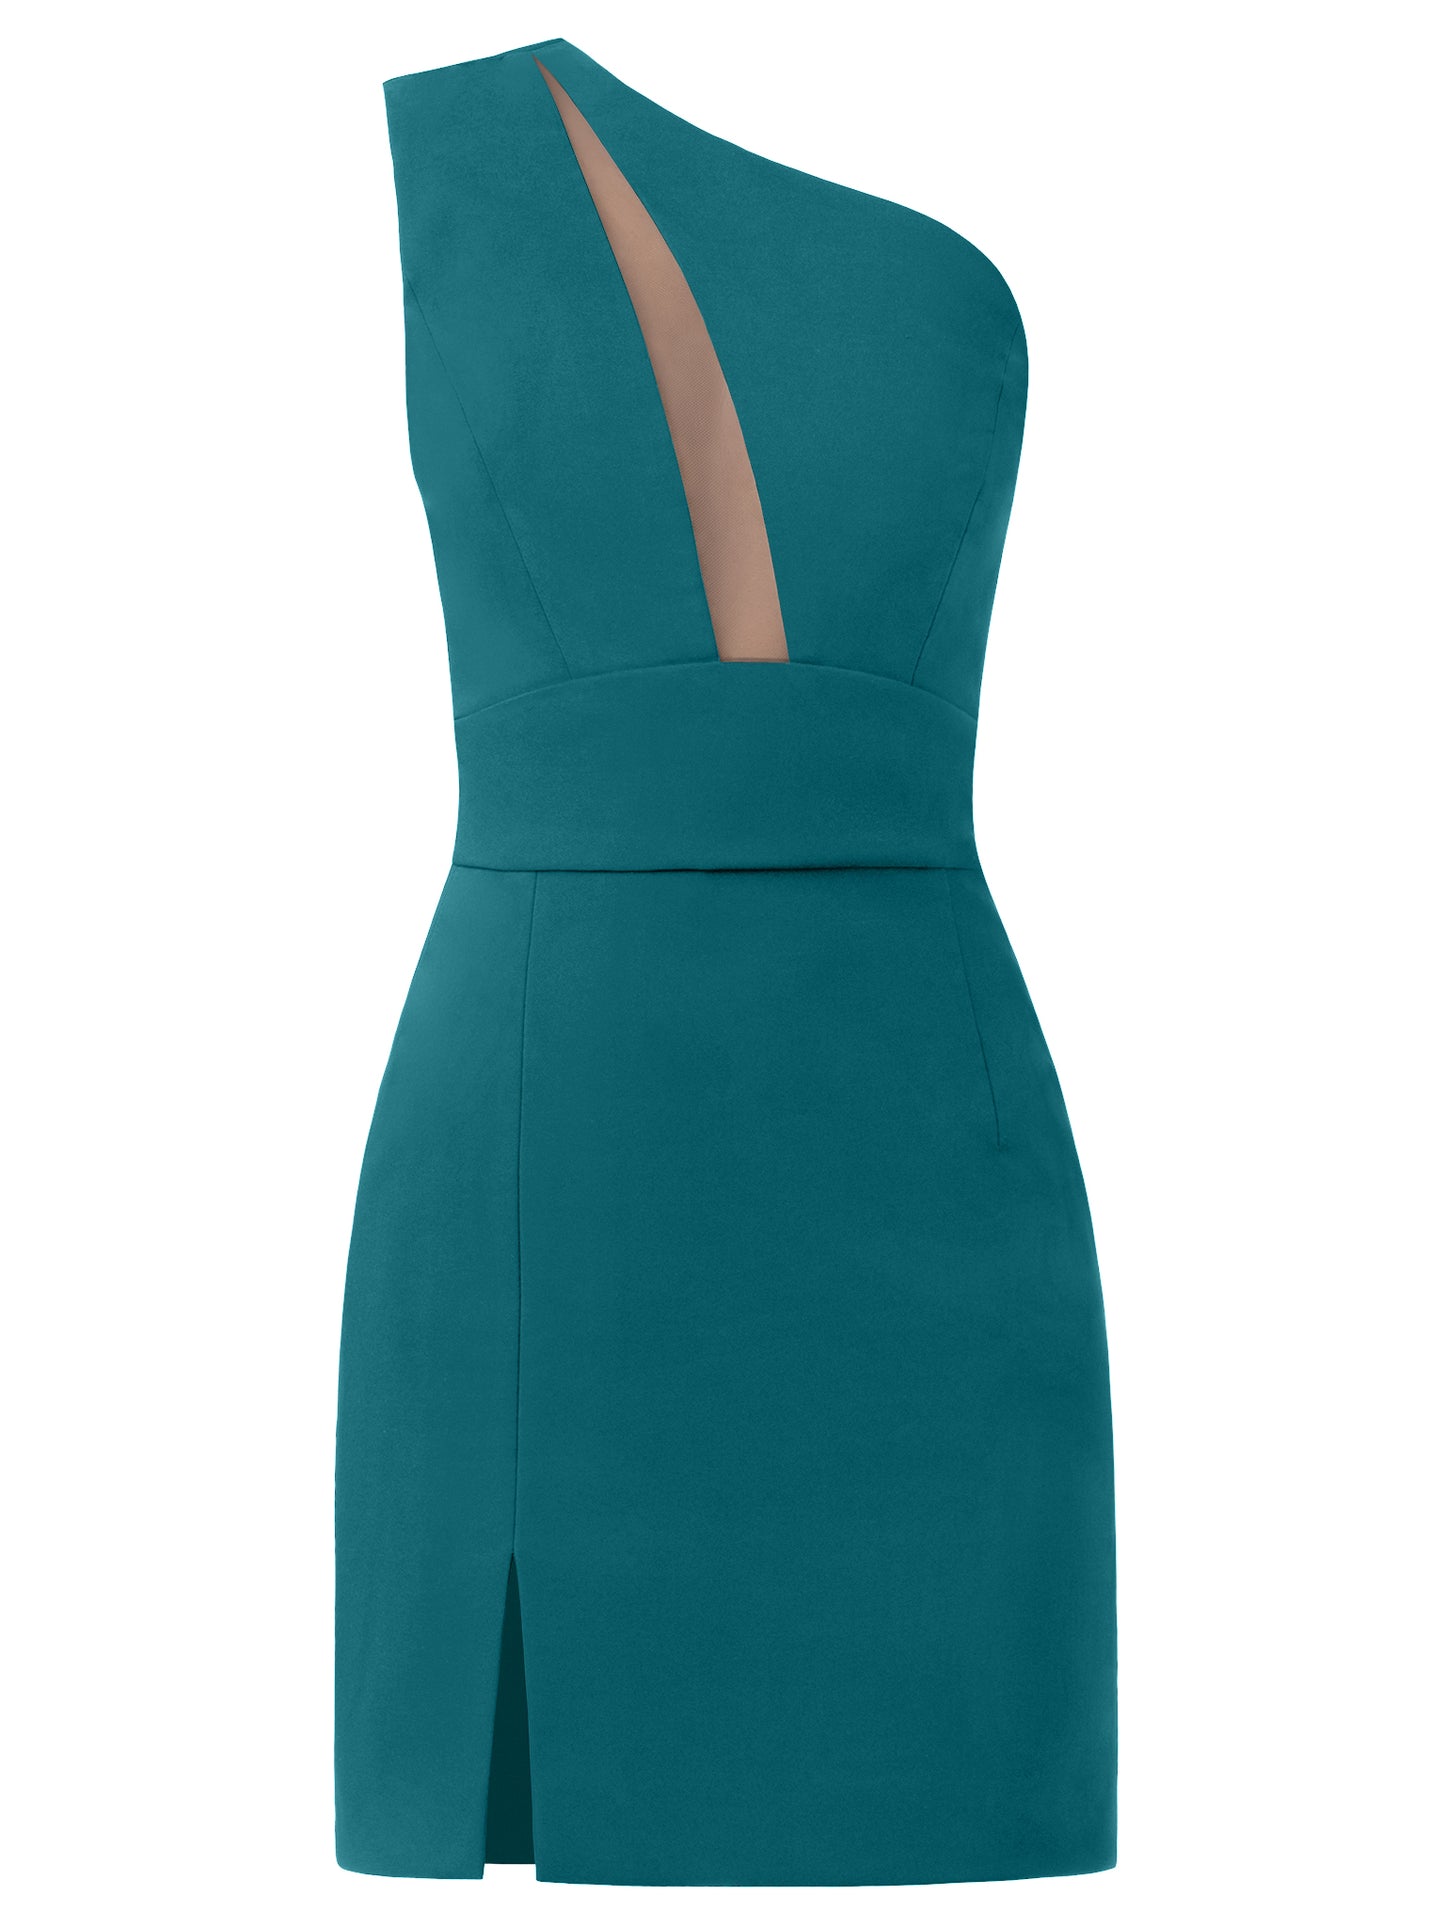 Tia Dorraine Love Weapon One-Shoulder Mini Dress - Magic Blue This mini dress showcases the sophisticated style and modern allure of Tia Dorraine. Its confidently feminine figure-hugging silhouette pairs with an asymmetrical neckline and cut-out bodice de